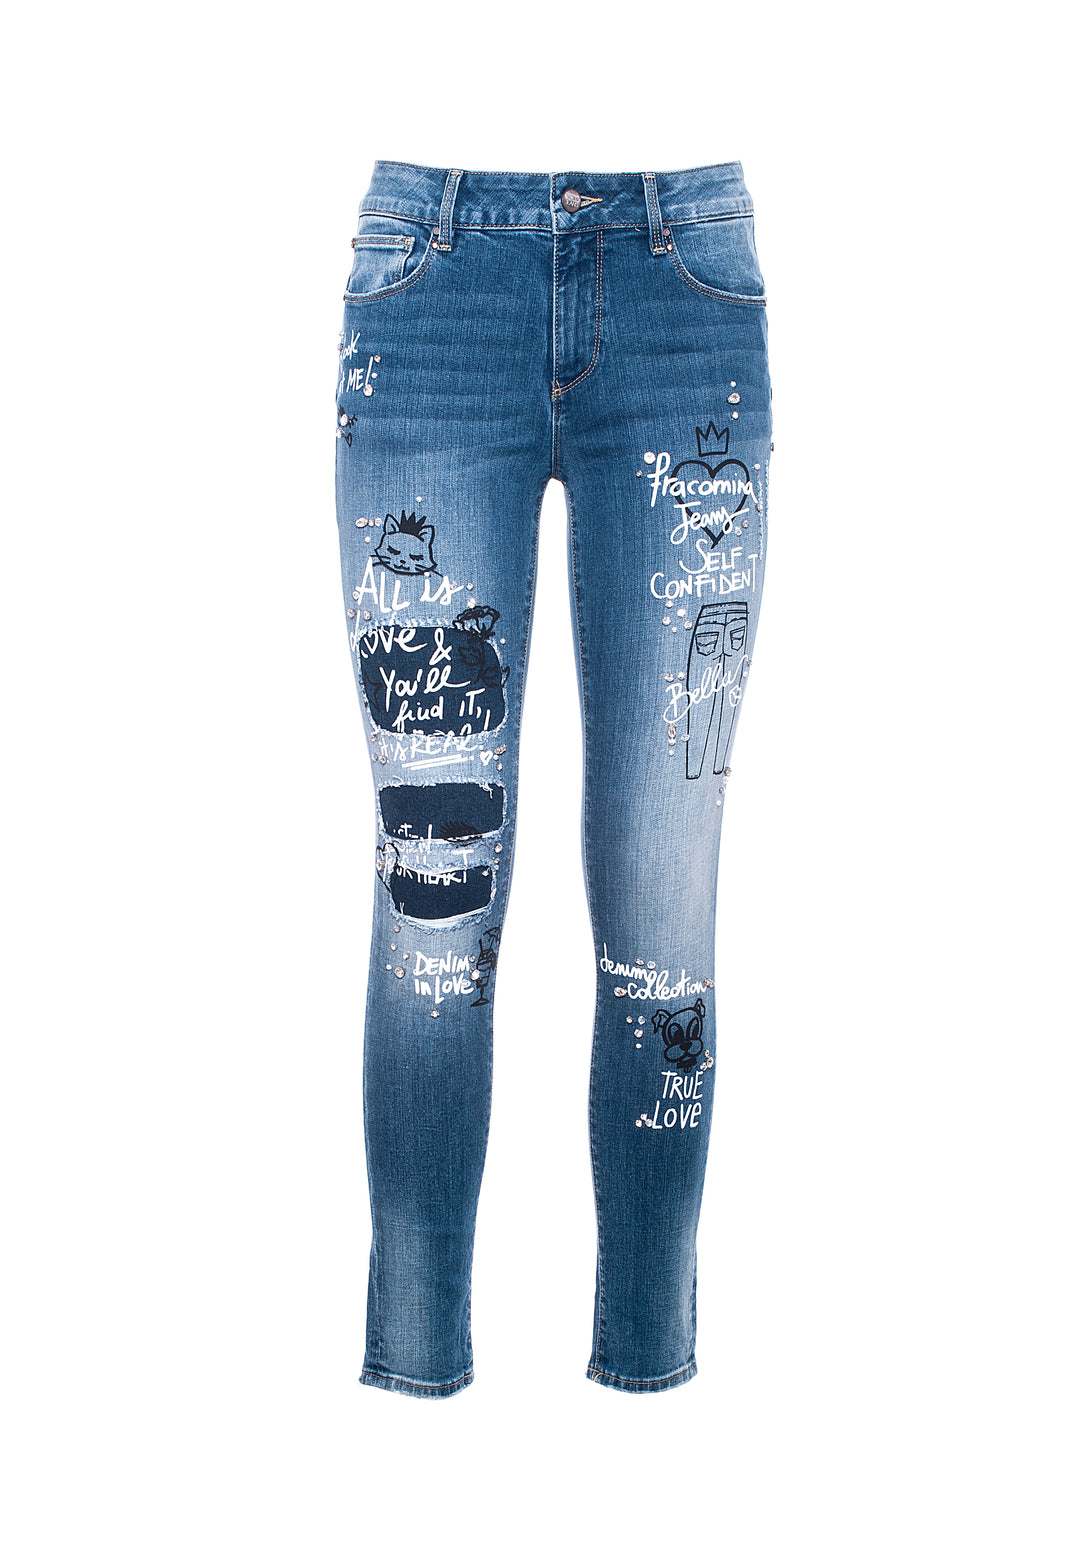 Jeans skinny fit made in stretch denim with middle wash